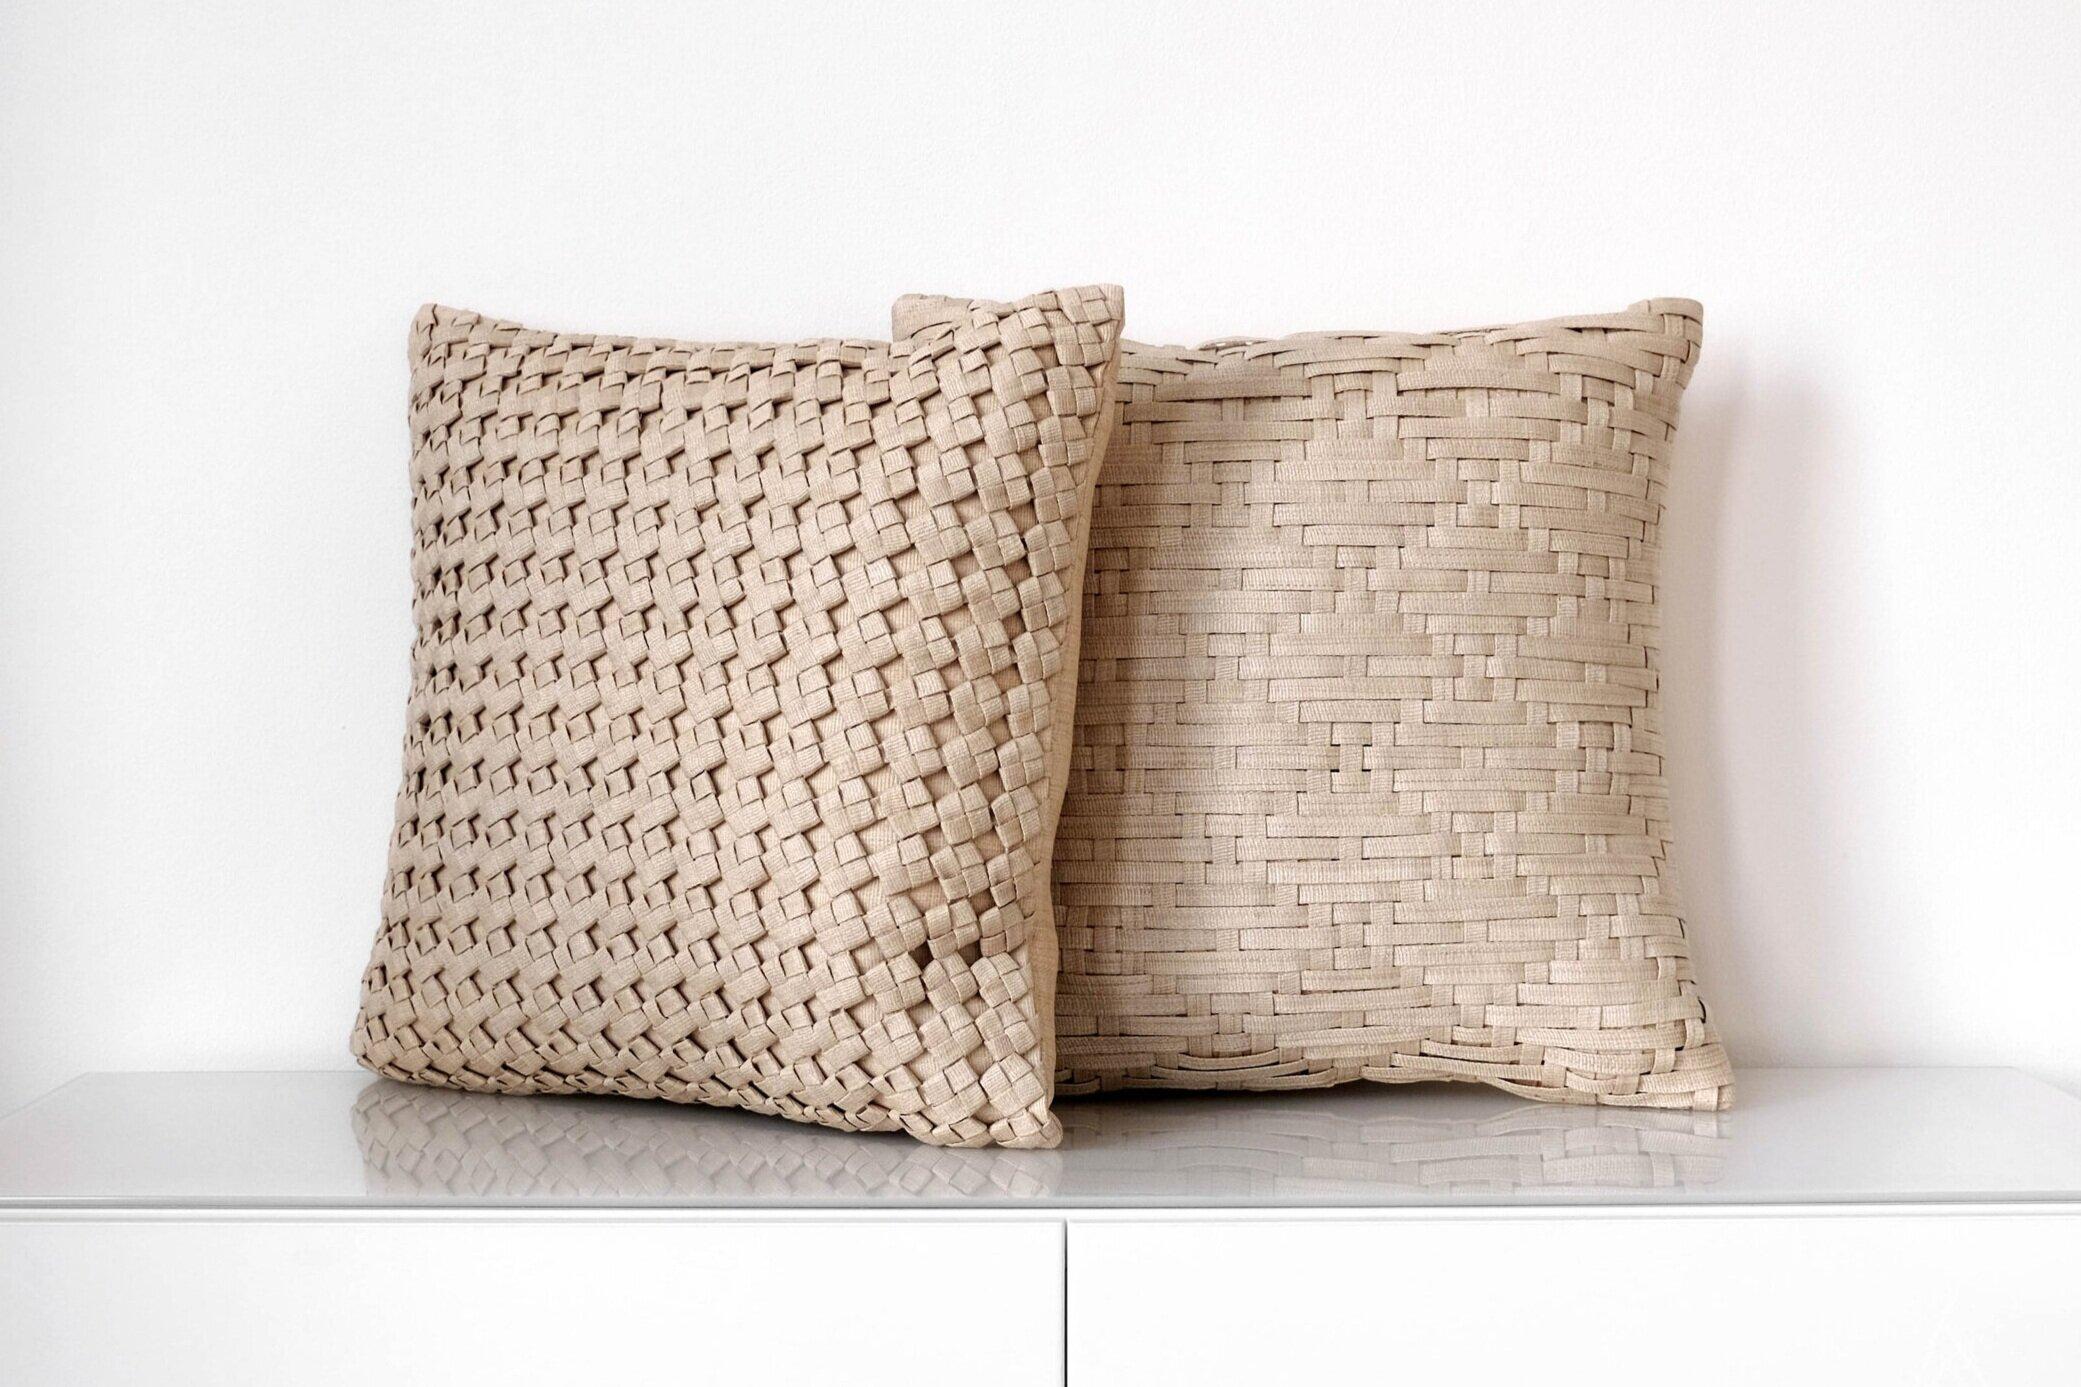 Hand-Woven Handcrafted T'nalak Basket Weave Cushion Cover 50x50cm For Sale